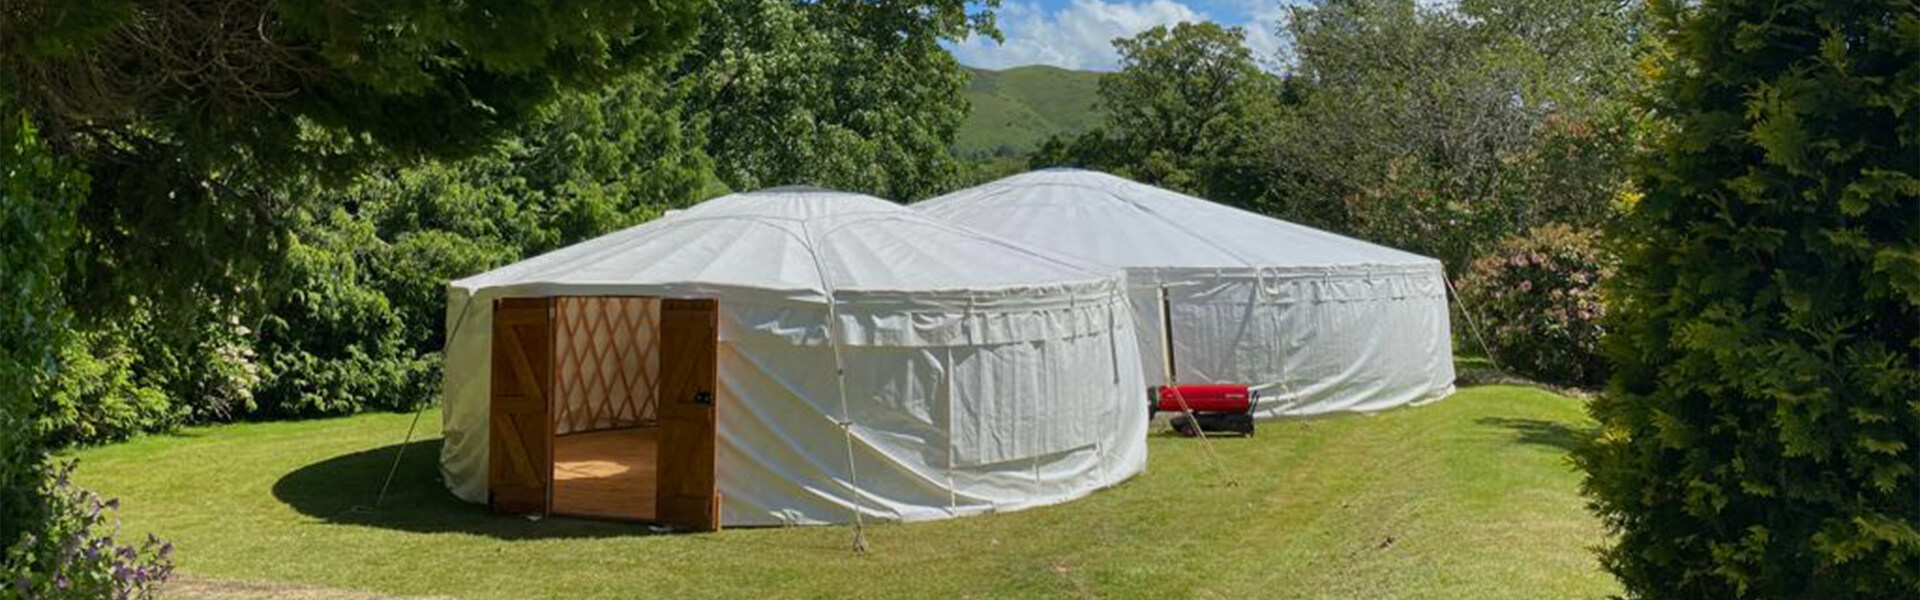 Two Connecting Yurts in a enclosed field